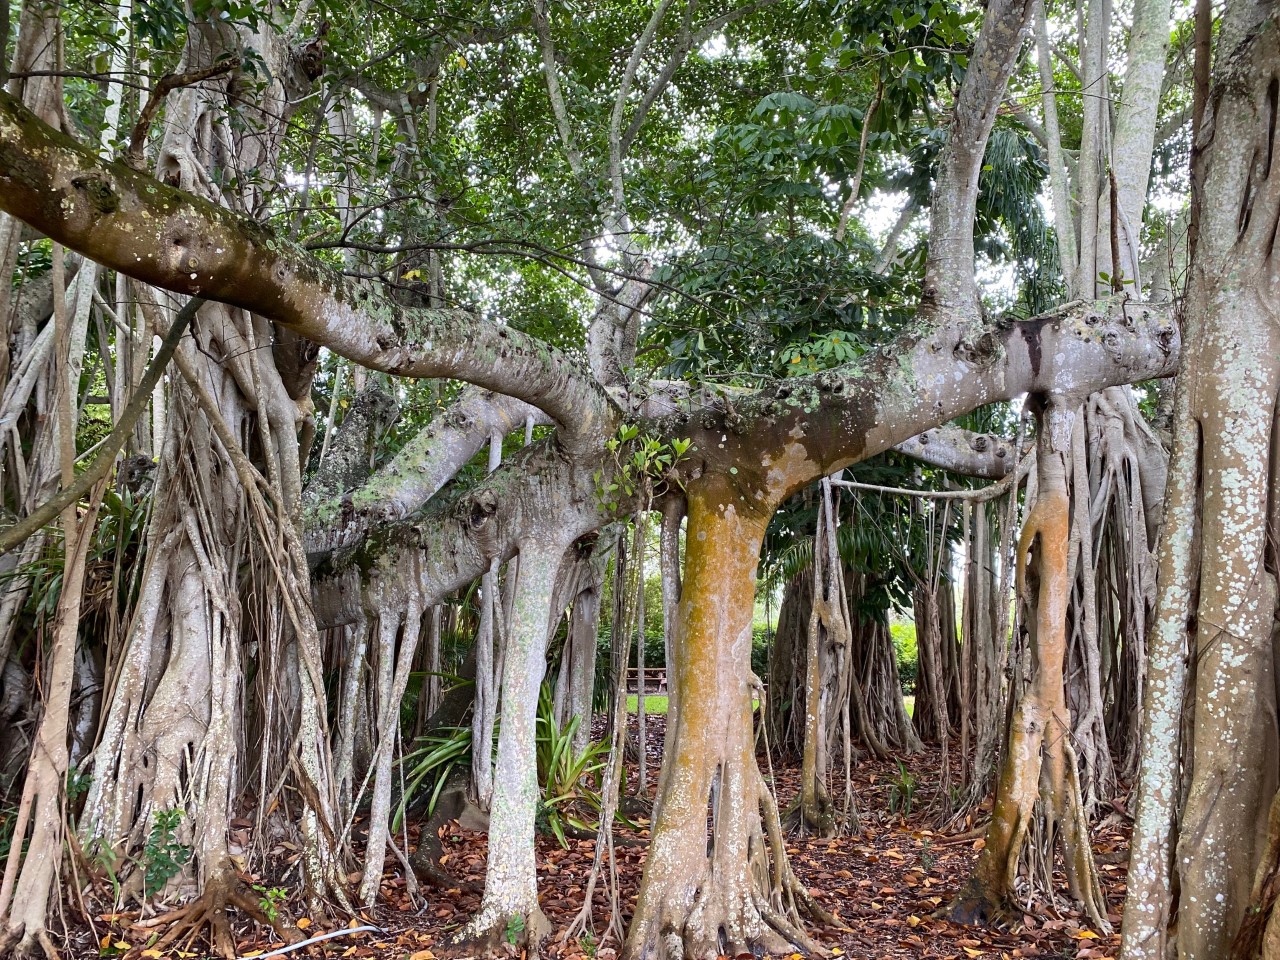 The massive Banyan Tree spreads out by the walkway to the Museum of Art.